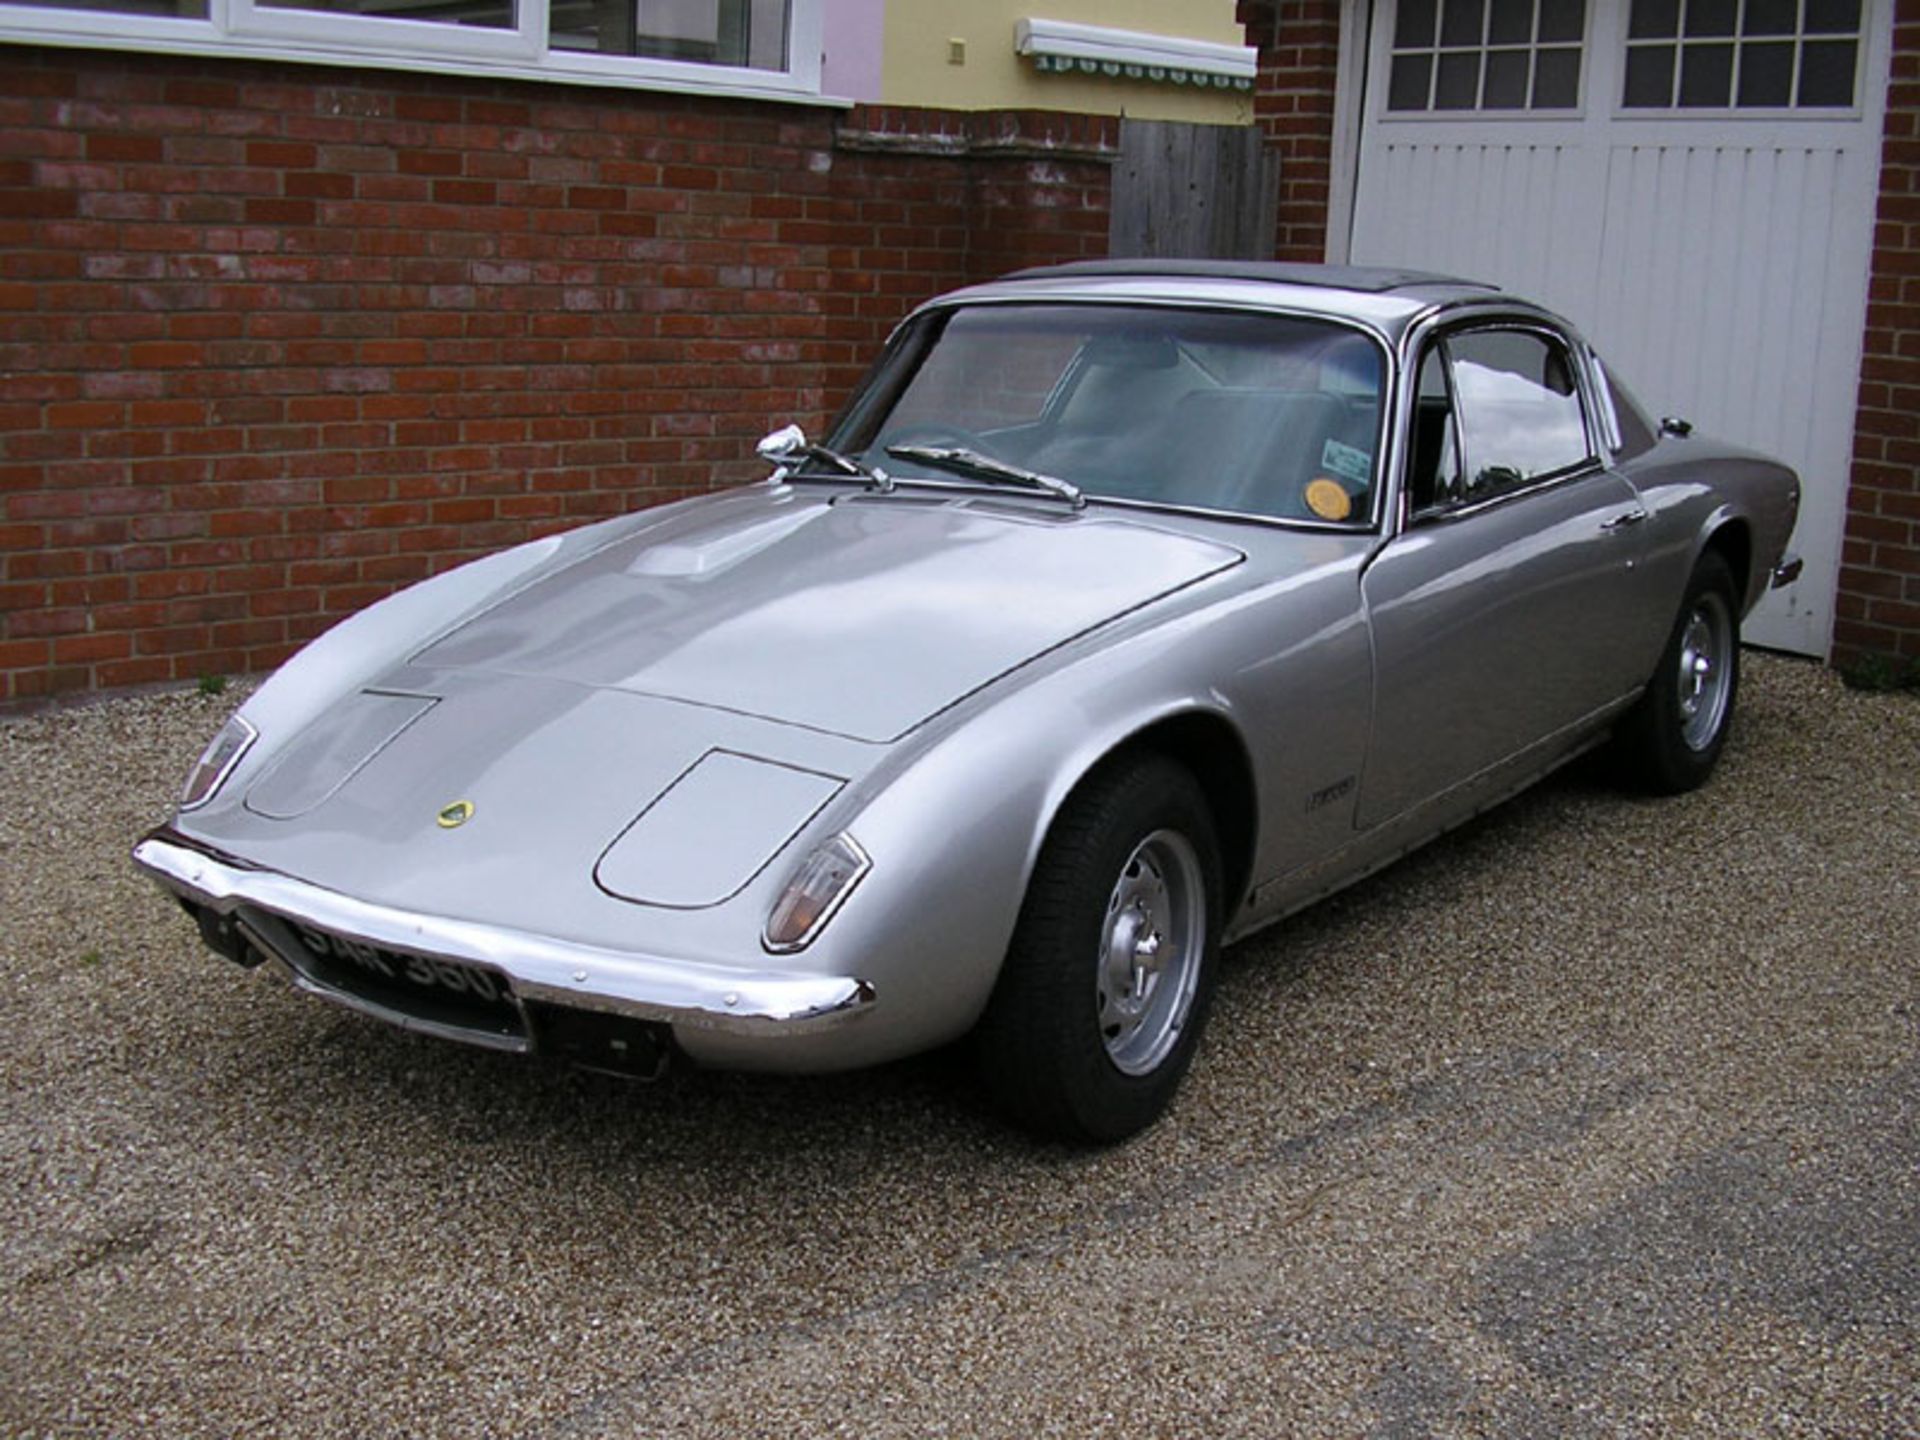 Lotus first applied the Elan name to its small Ron Hickman-designed two-seat Roadster of 1962. It